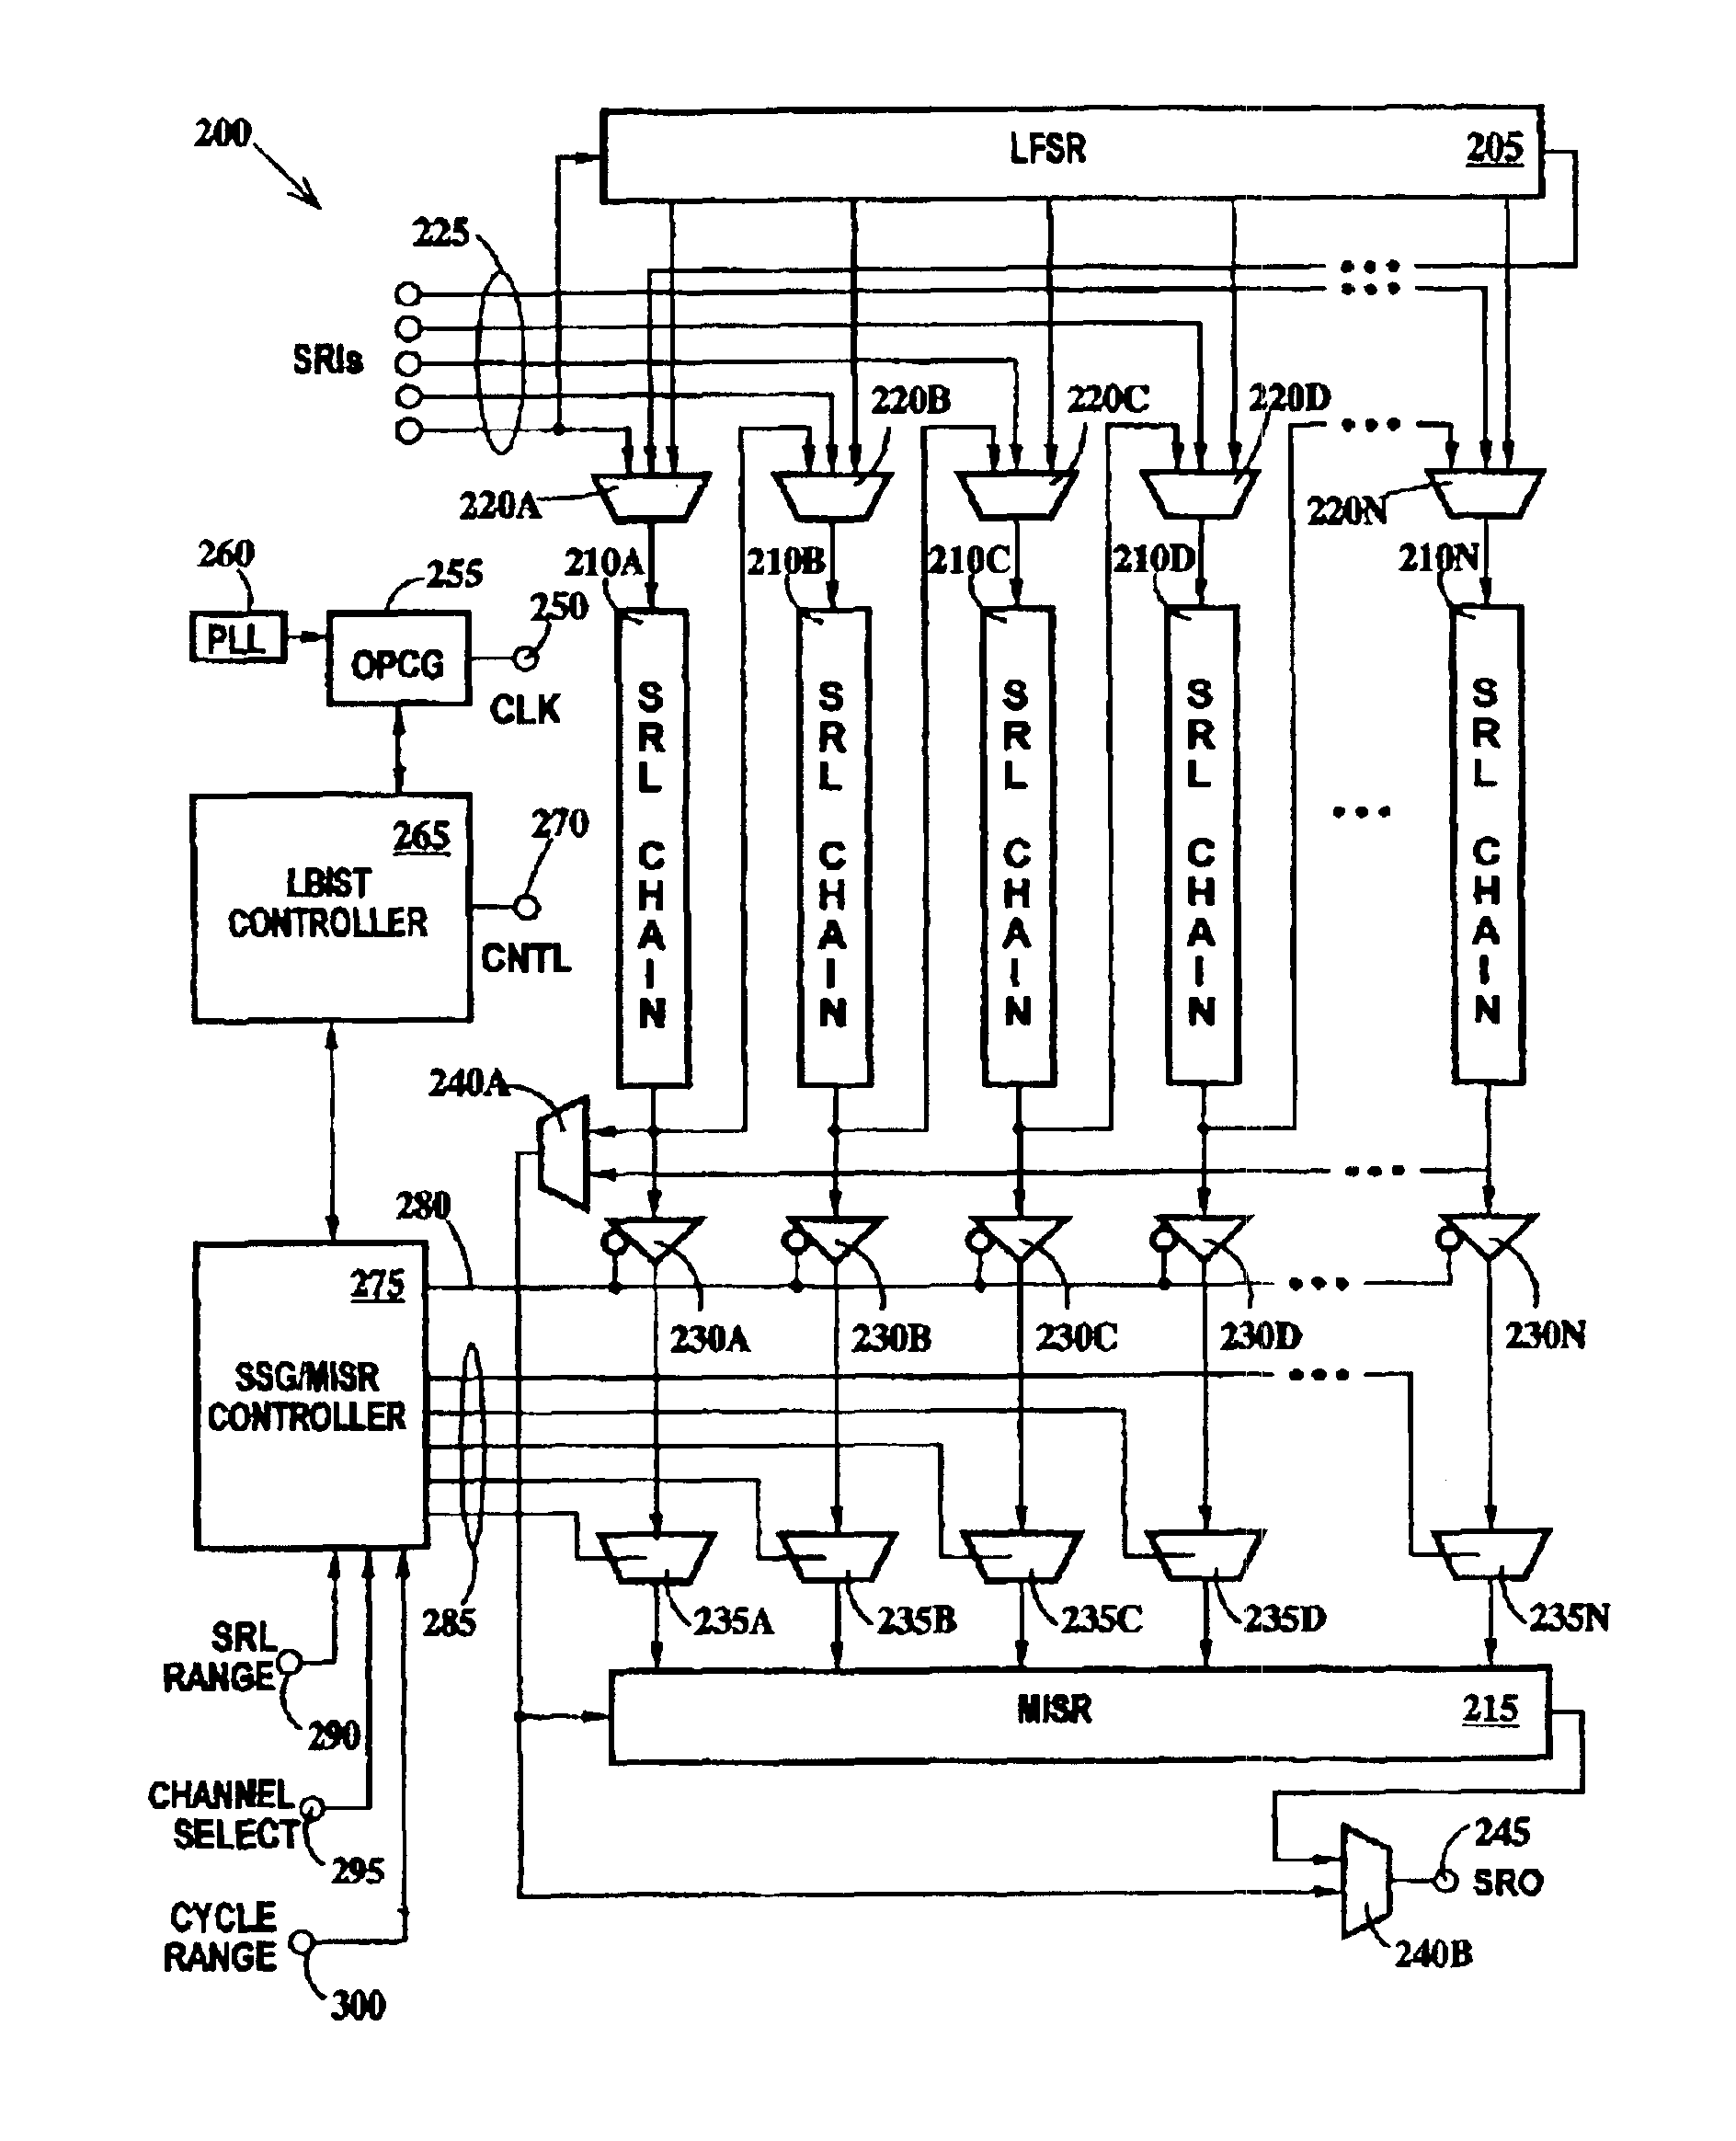 Diagnostic method for structural scan chain designs